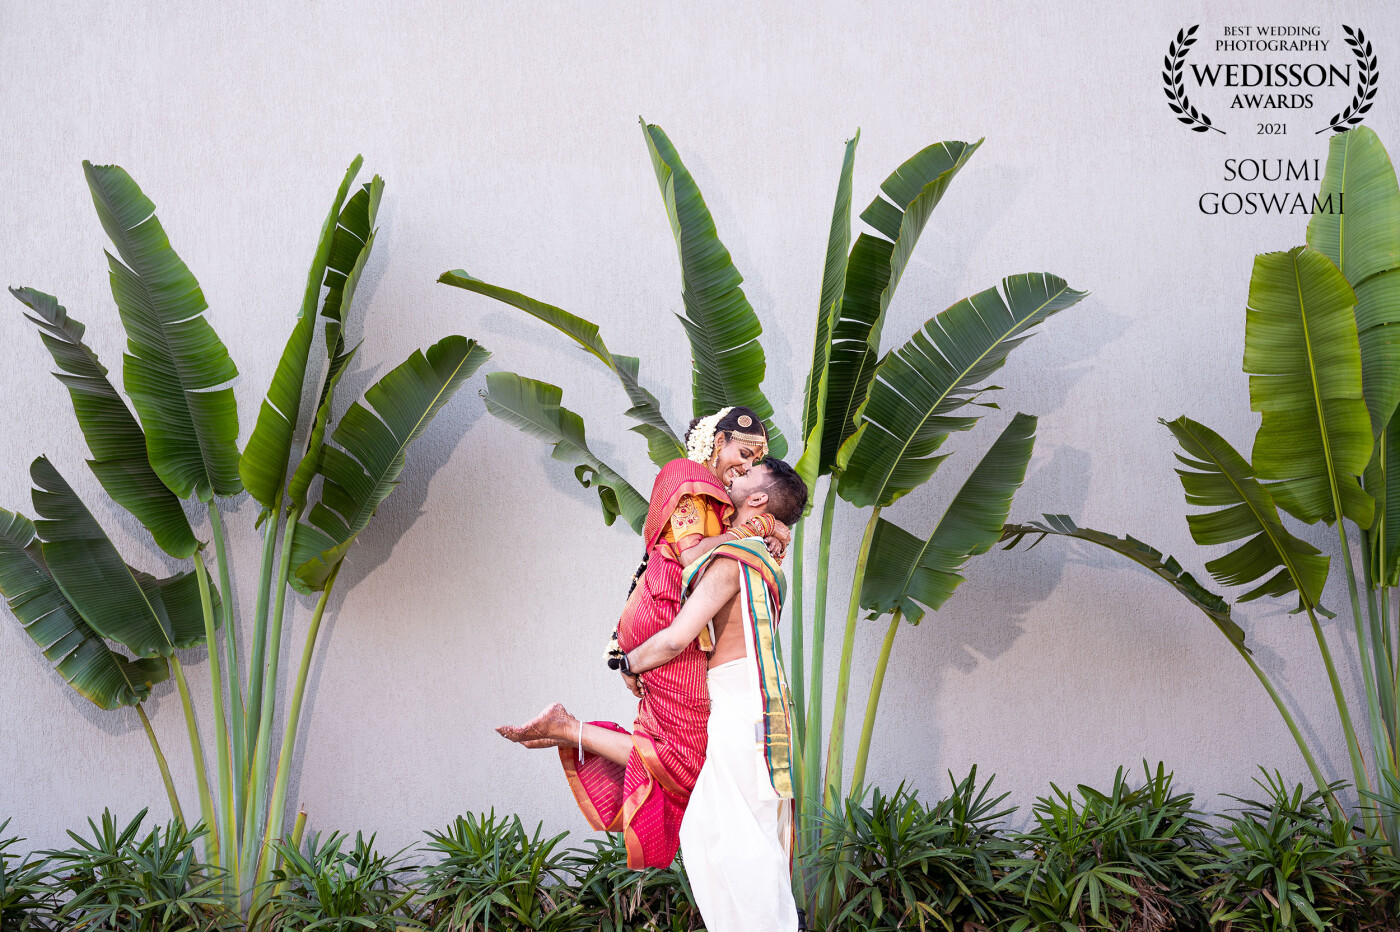 This was right after Deepak & Pooja's wedding. With banana trees in the backdrop and their authentic wedding attire, I knew this was going to be the perfect spot, but only became epic when Deepak lifted Pooja. Simply love this one :)